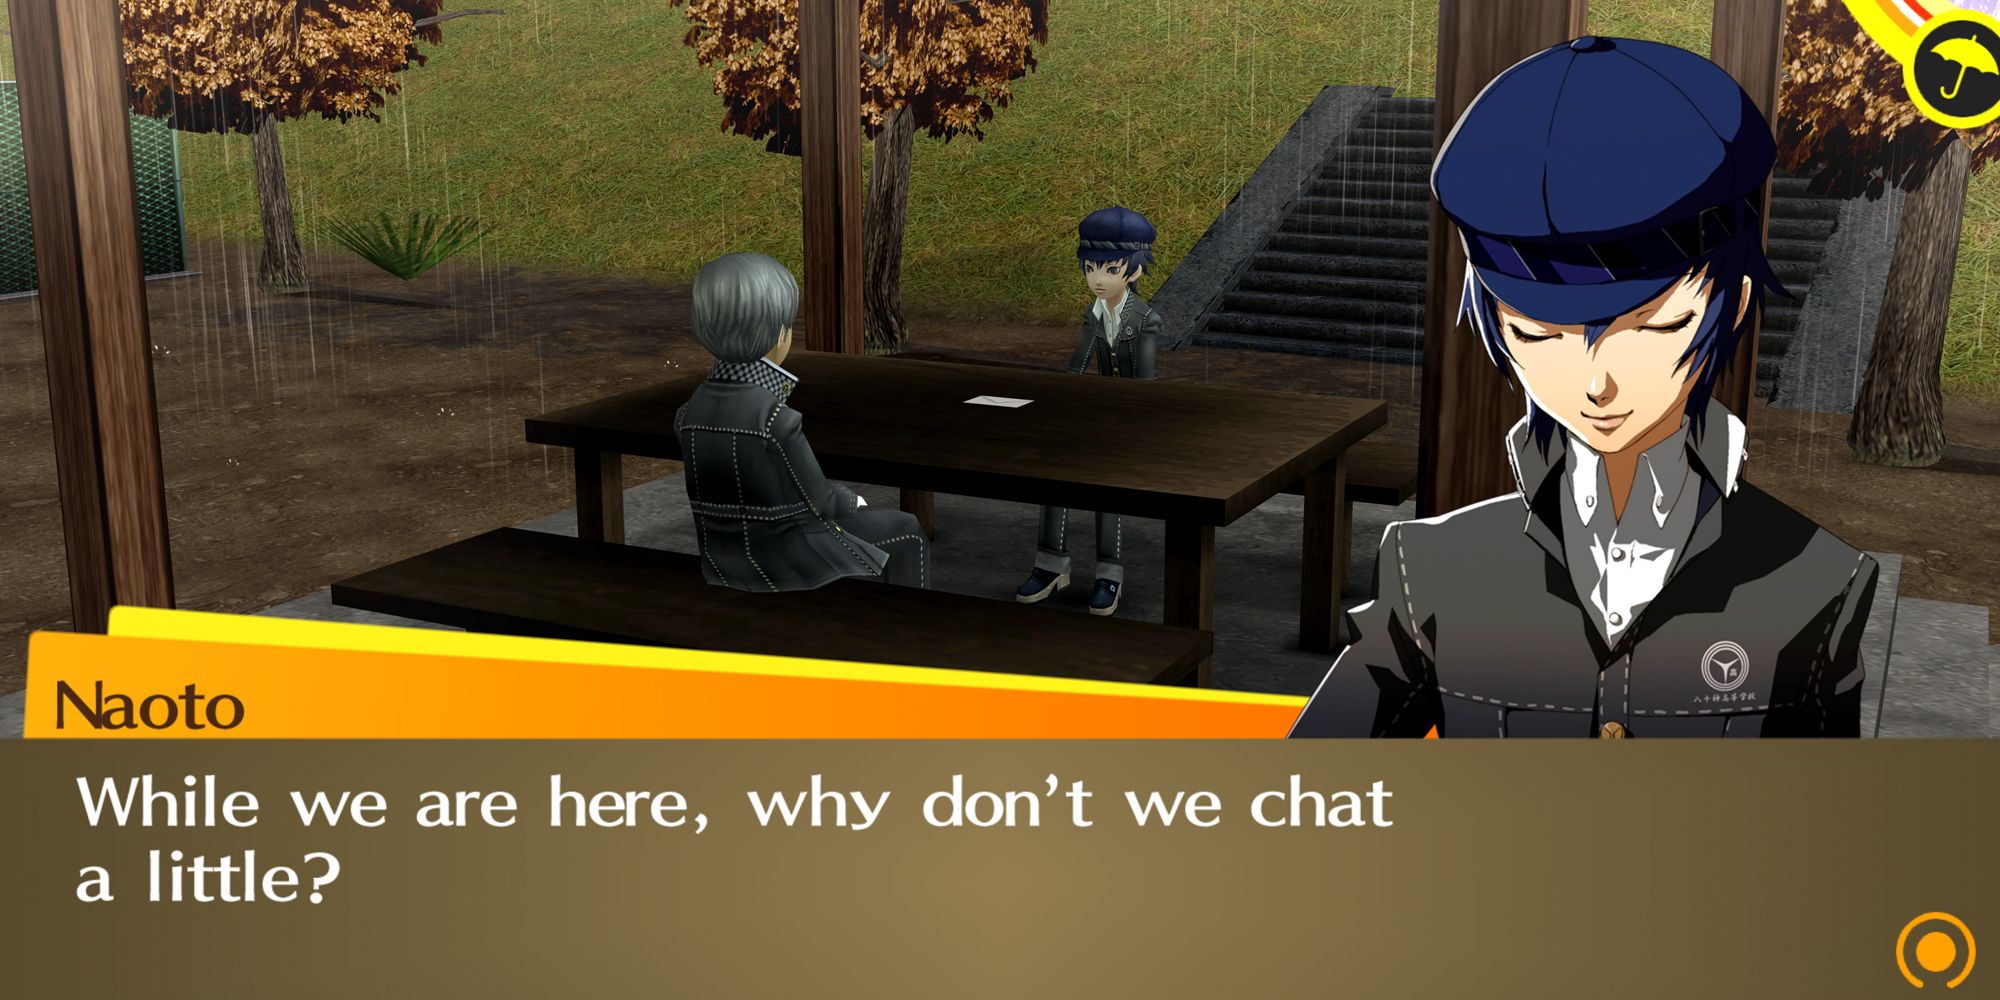 Naoto and Yu talking in the park at a picnic table in Persona 4 Golden